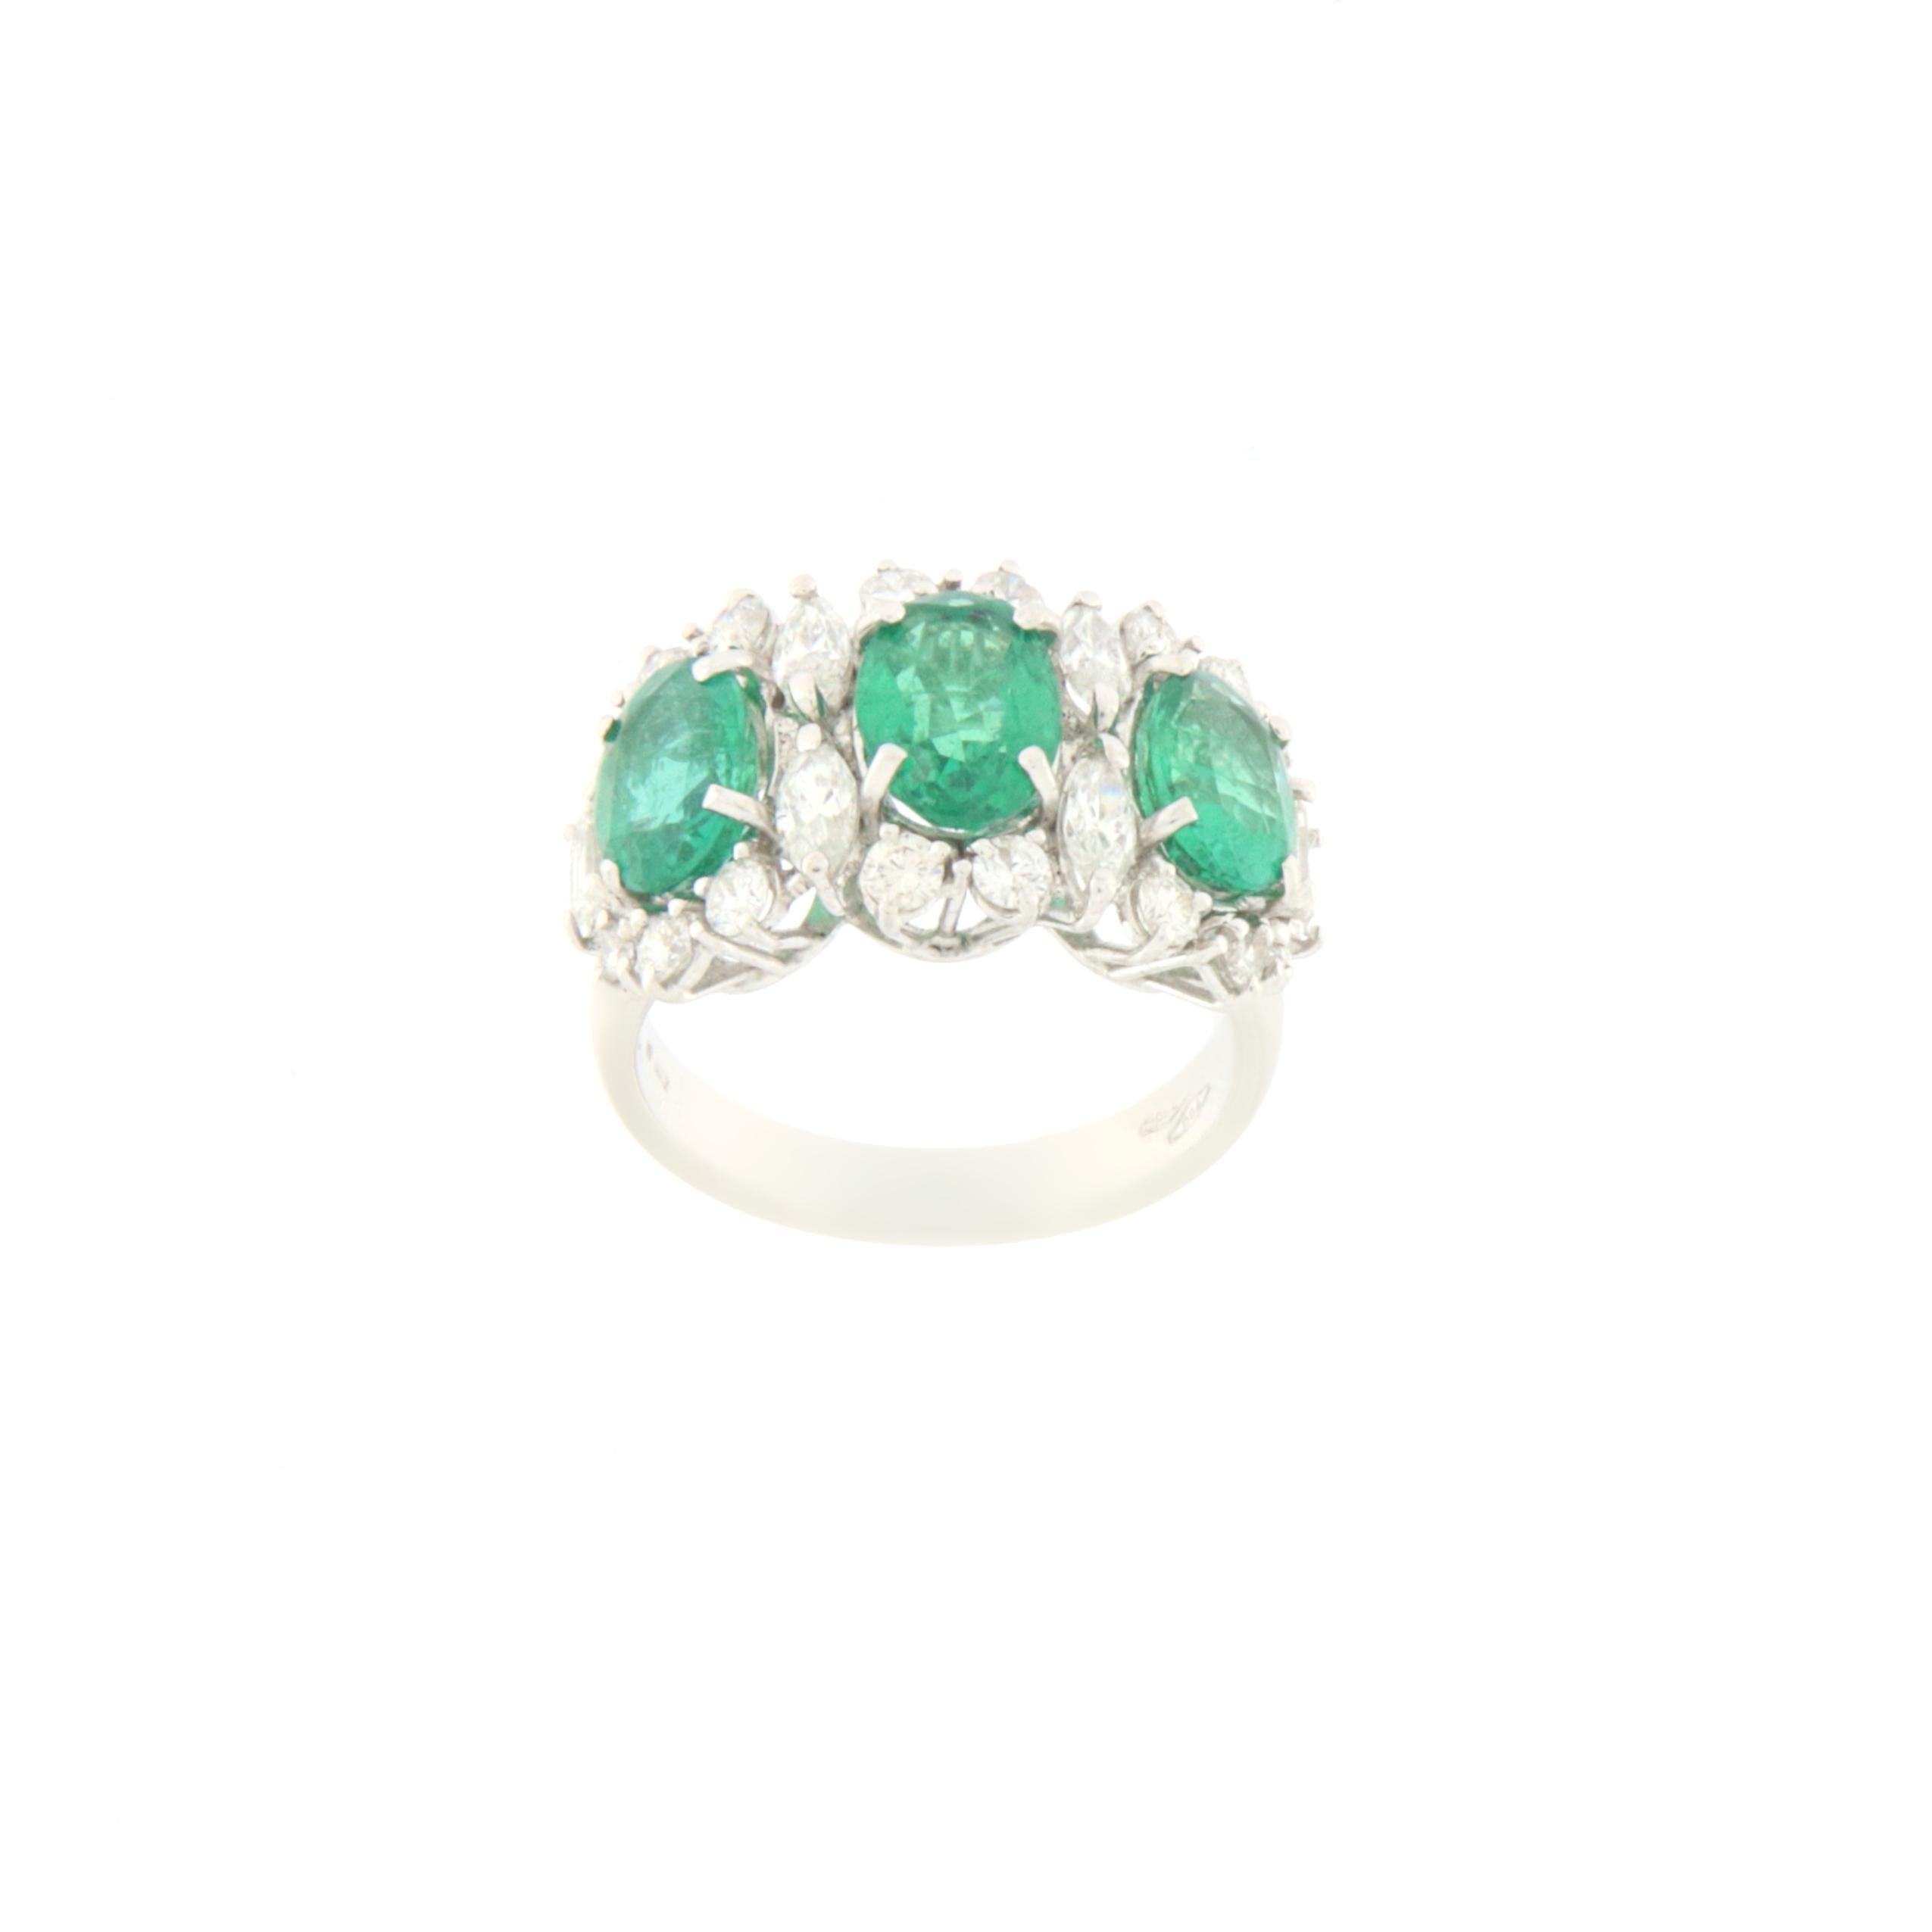 Beautiful 18 karat white gold cocktail ring. Handmade by our artisans composed with three emeralds and diamonds

Ring total weight 7.90 grams
Diamonds weight 1.52 karat
Emerald weight 3.63 karat
Ring size 16.5 ITA 7.75 US
(All rings can be resized